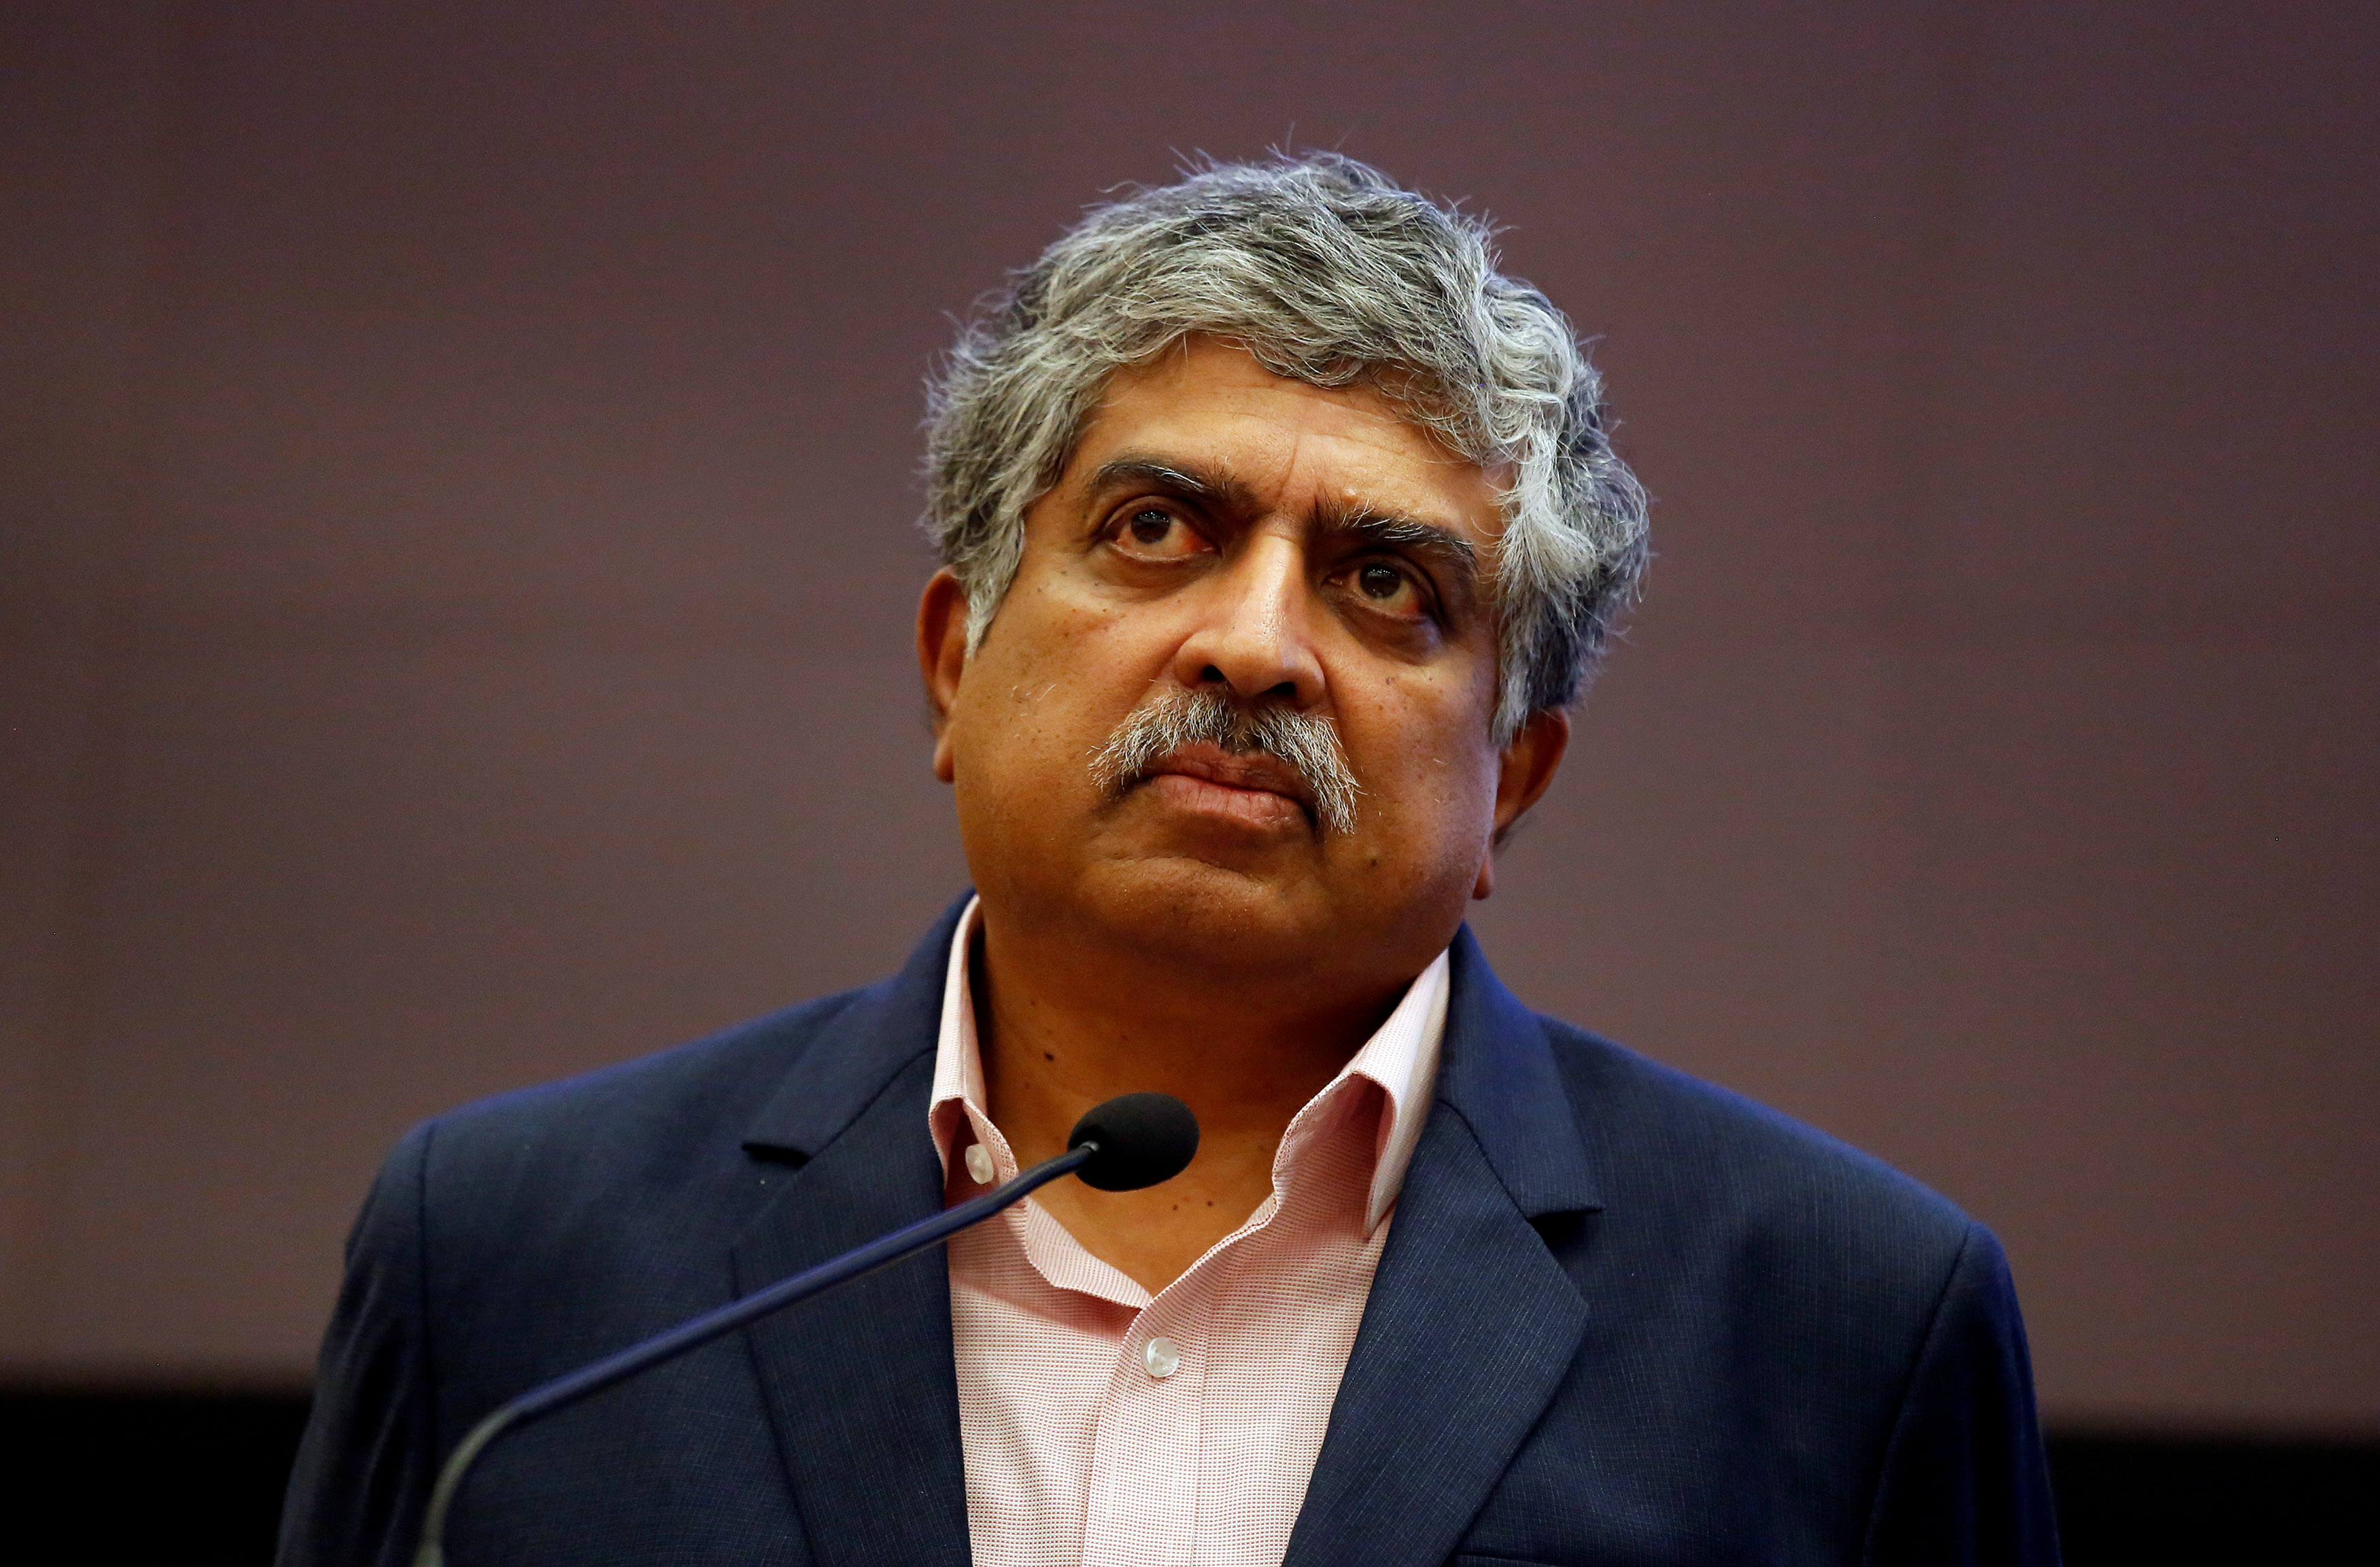 Nandan Nilekani, Co-founder and Non-Executive Chairman of Infosys, listens to reporters' questions during the announcement of the company's quarterly results at its headquarters in Bengaluru, India, January 12, 2018. REUTERS/Abhishek N. Chinnappa